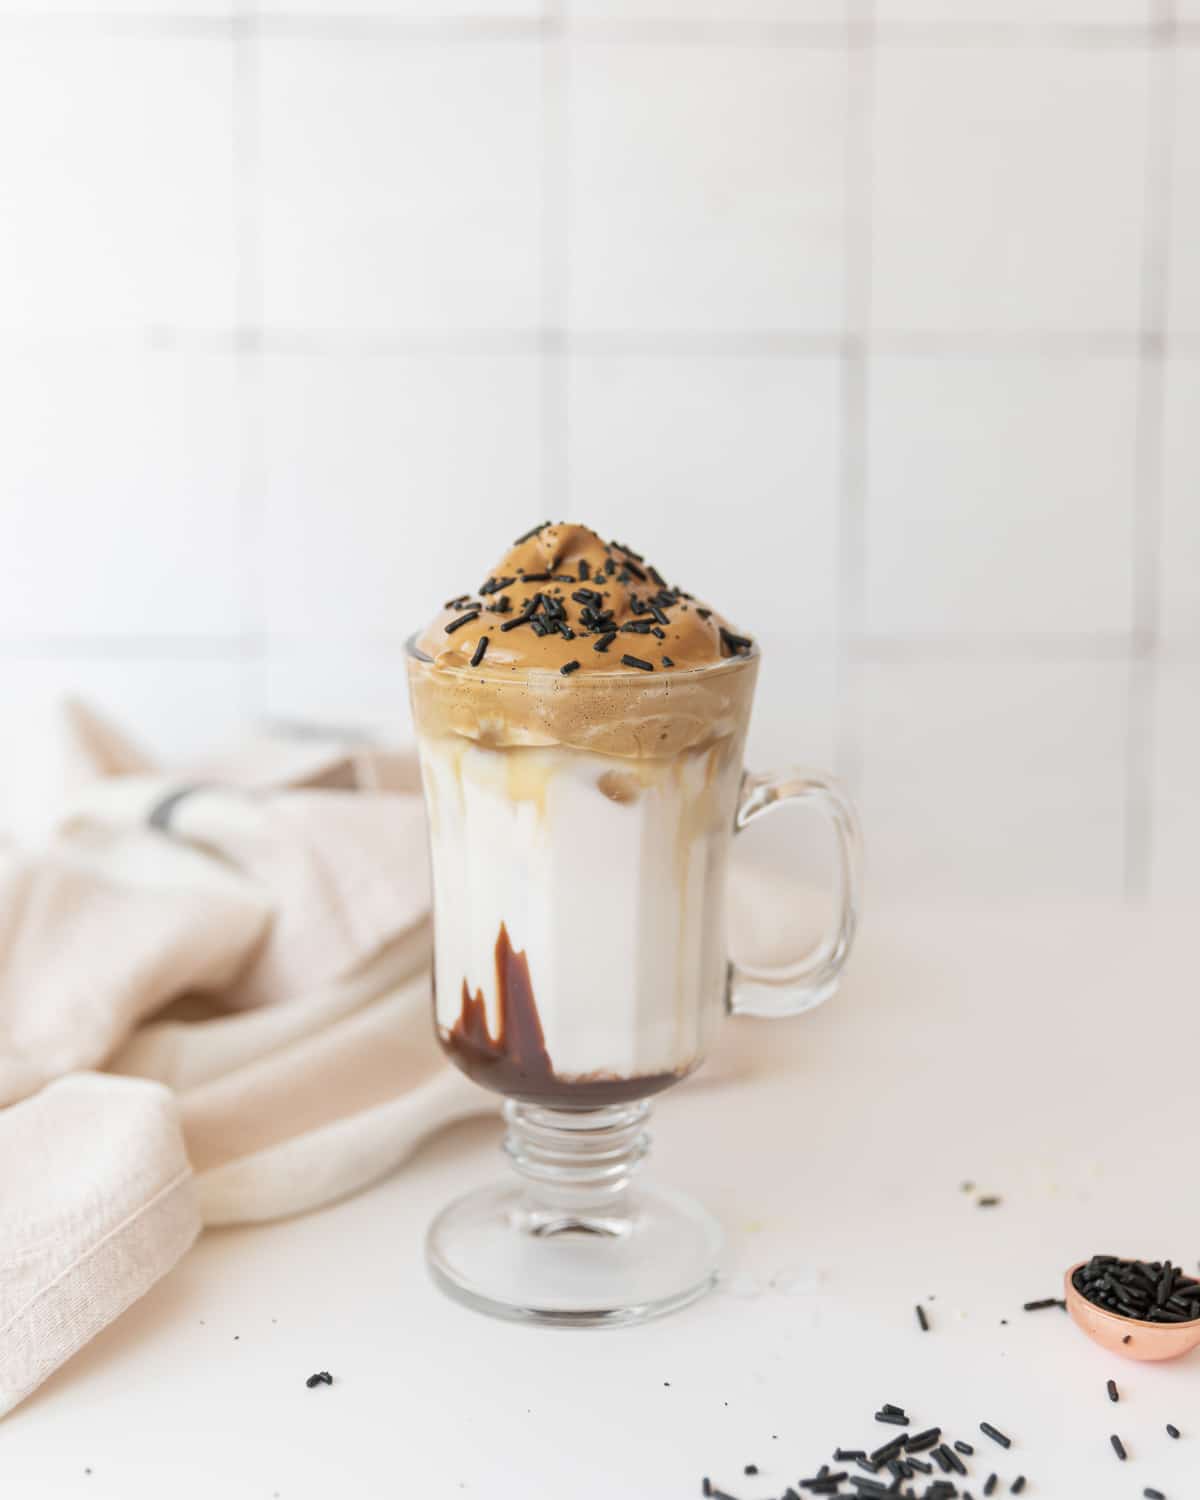 A side on view of a completed cup of mocha dalgona coffee with chocolate sprinkles on top.